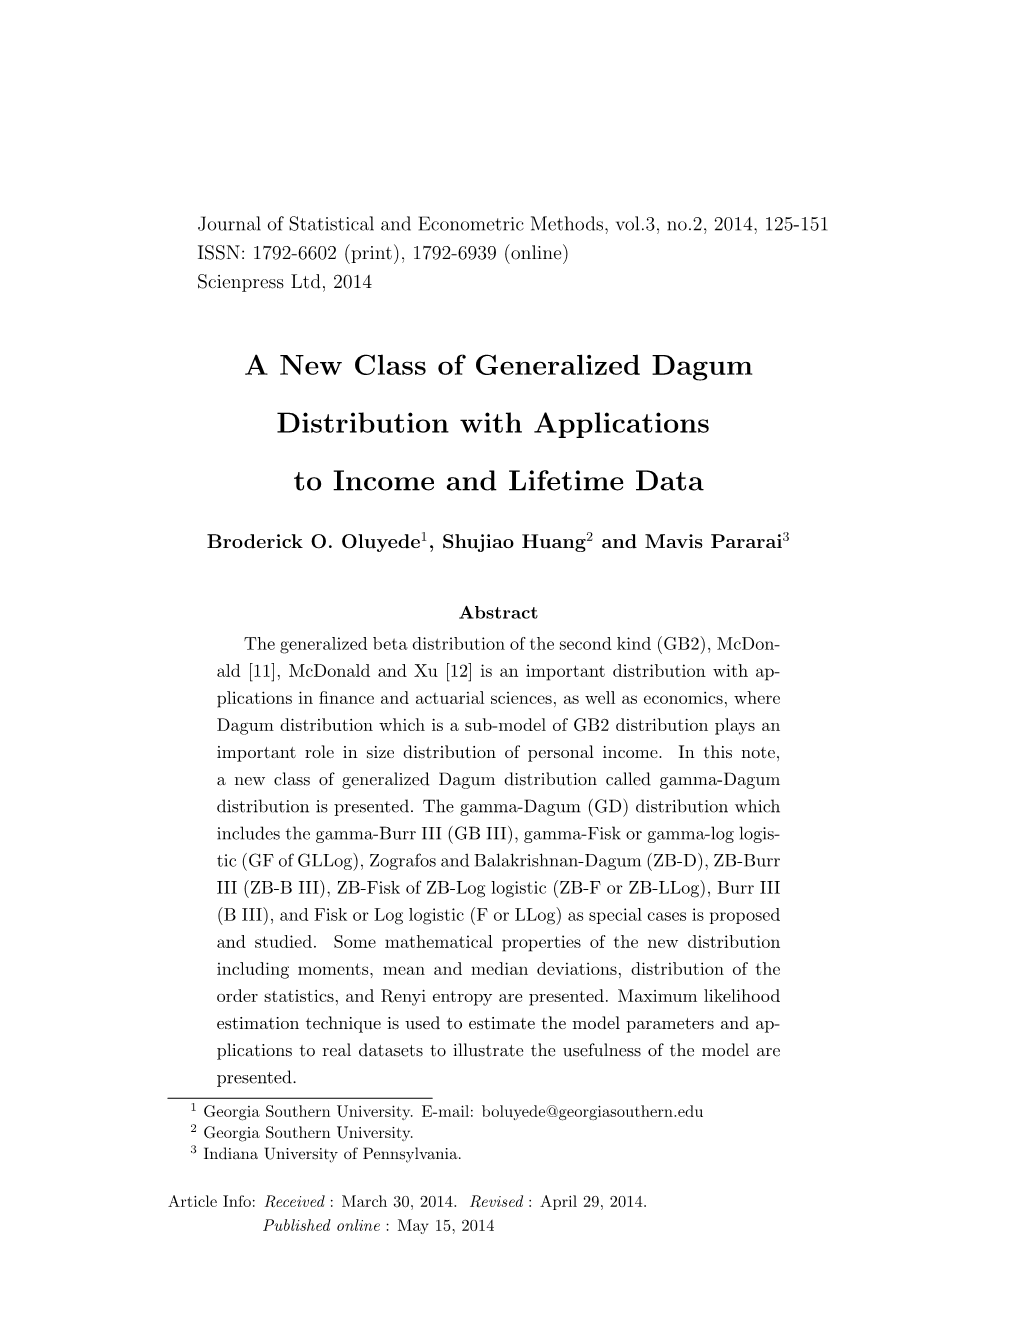 A New Class of Generalized Dagum Distribution with Applications To